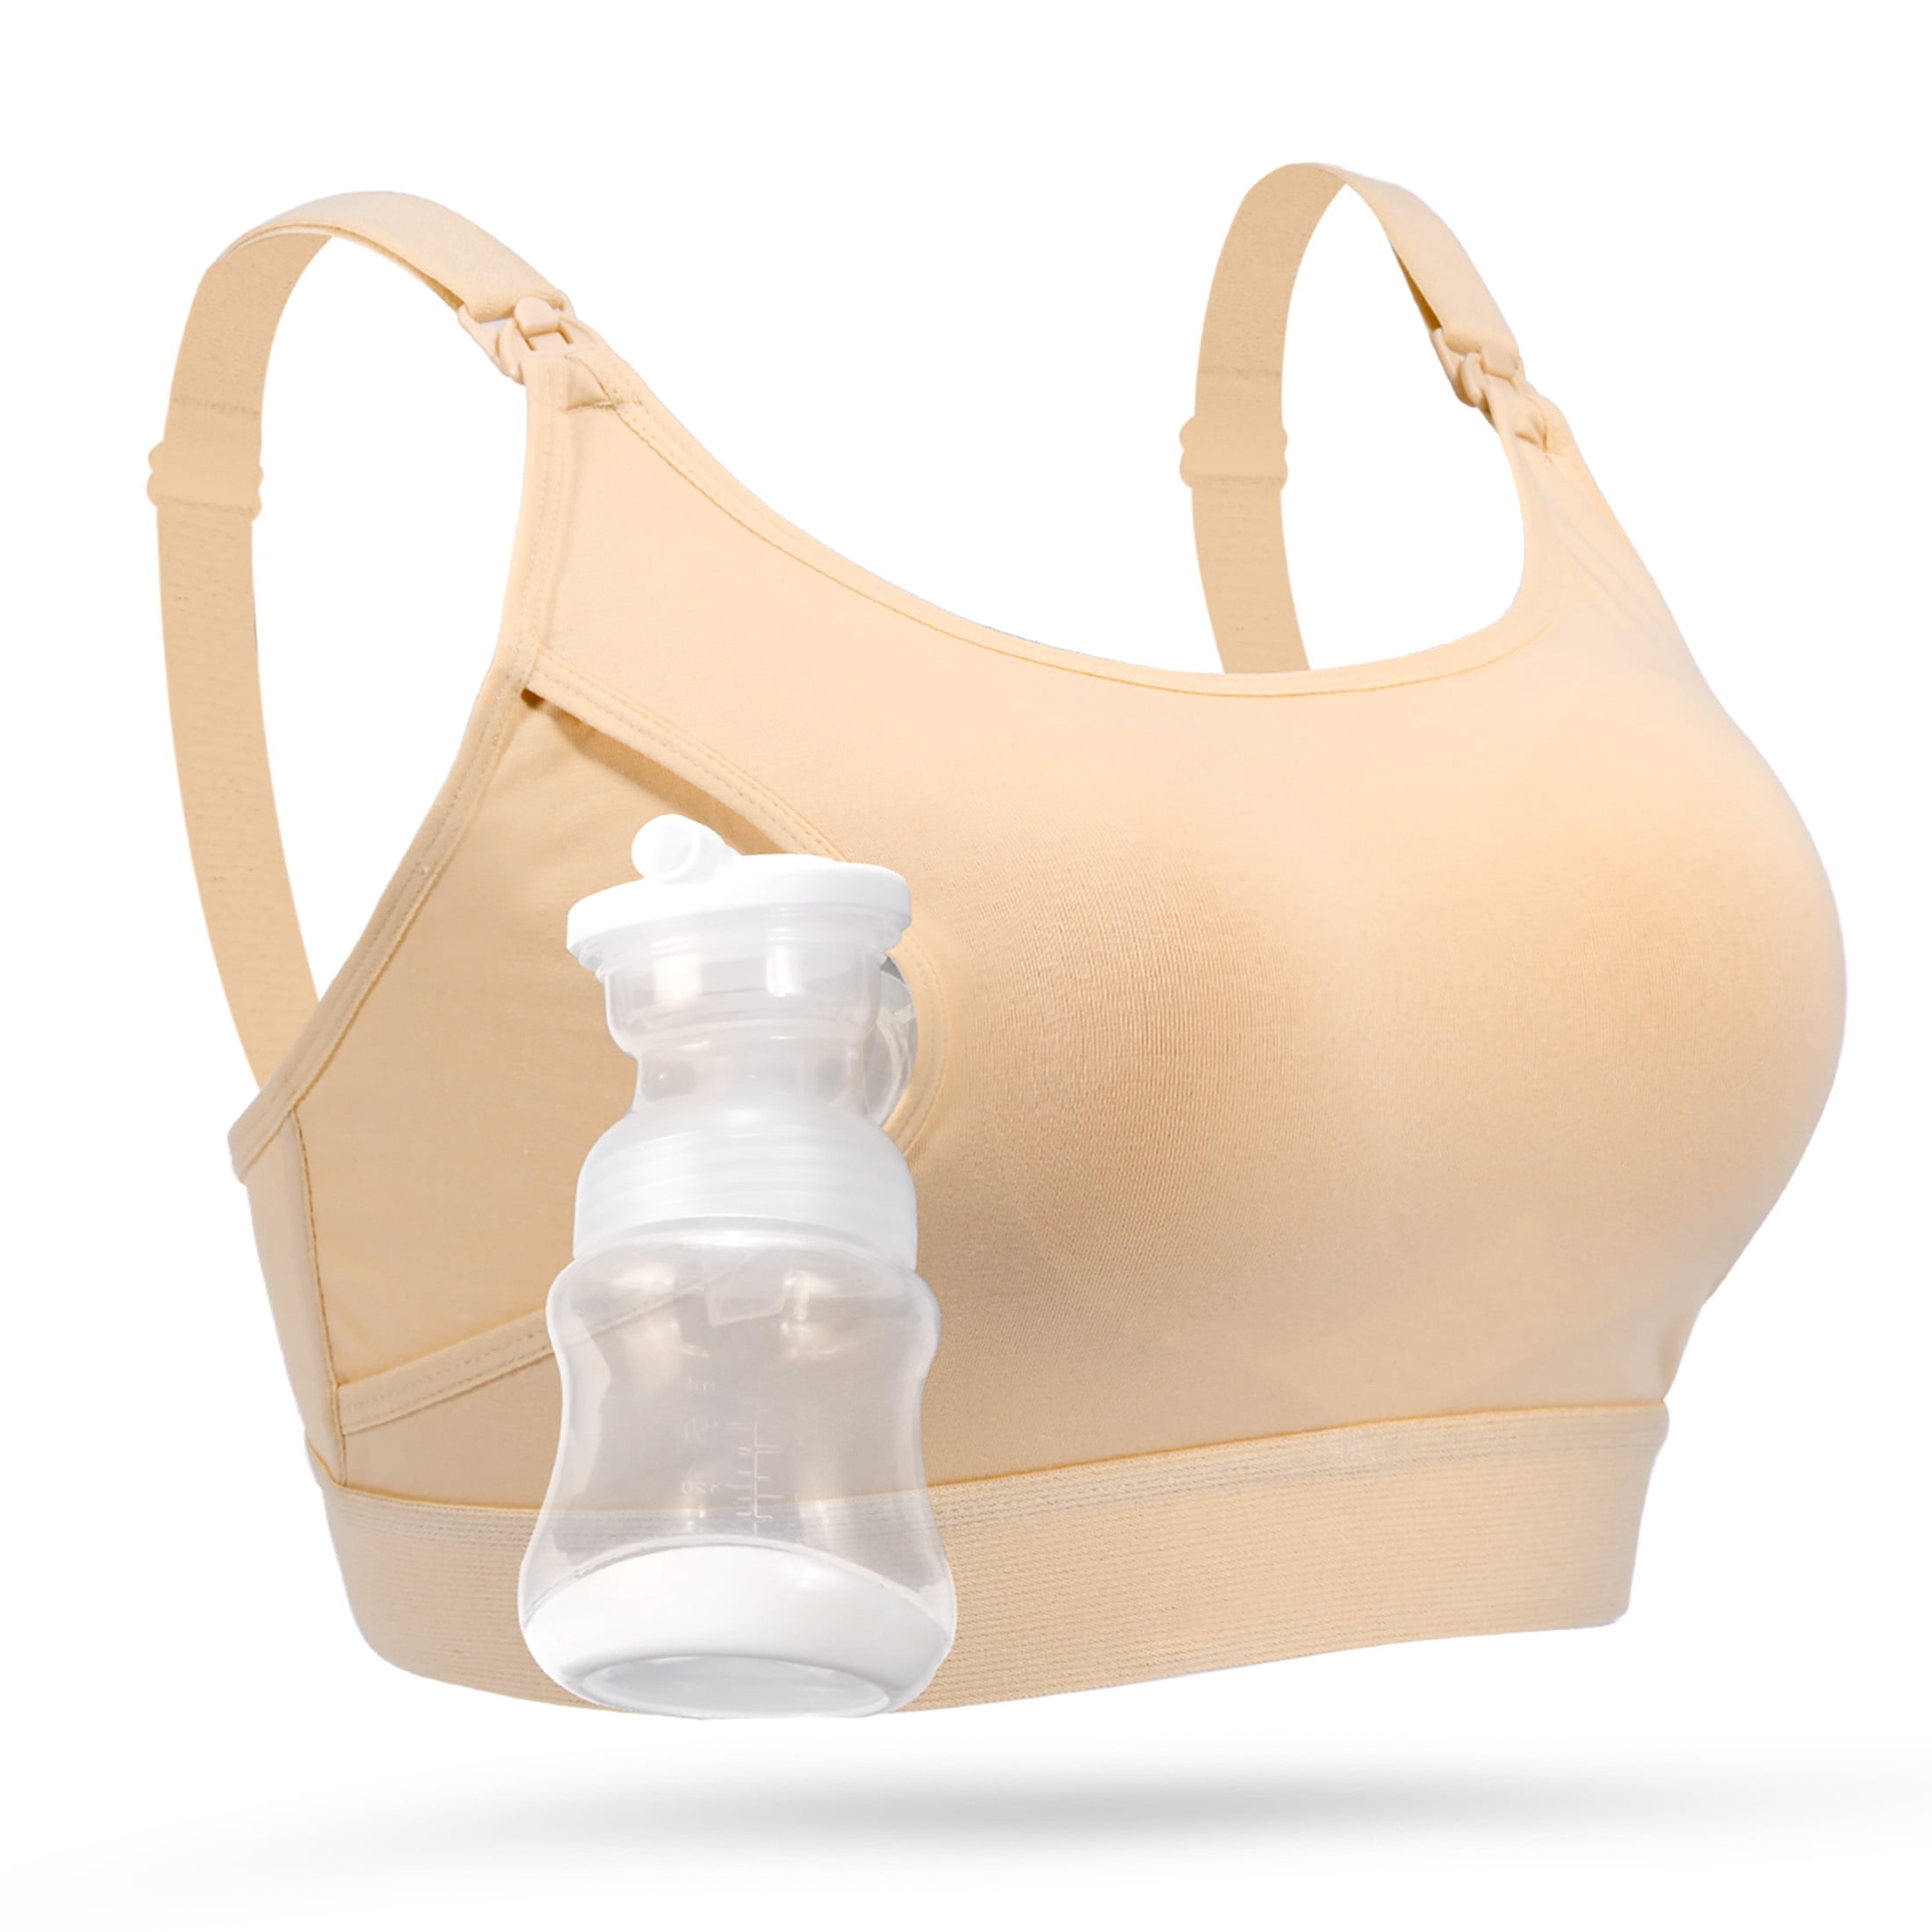 Hands Free Pumping Bra, Momcozy Adjustable Breast-Pumps Holding and Nursing  Bra, Suitable for Breastfeeding-Pumps by Lansinoh, Philips Avent, Spectra,  Evenflo and More(Beige,Medium) 